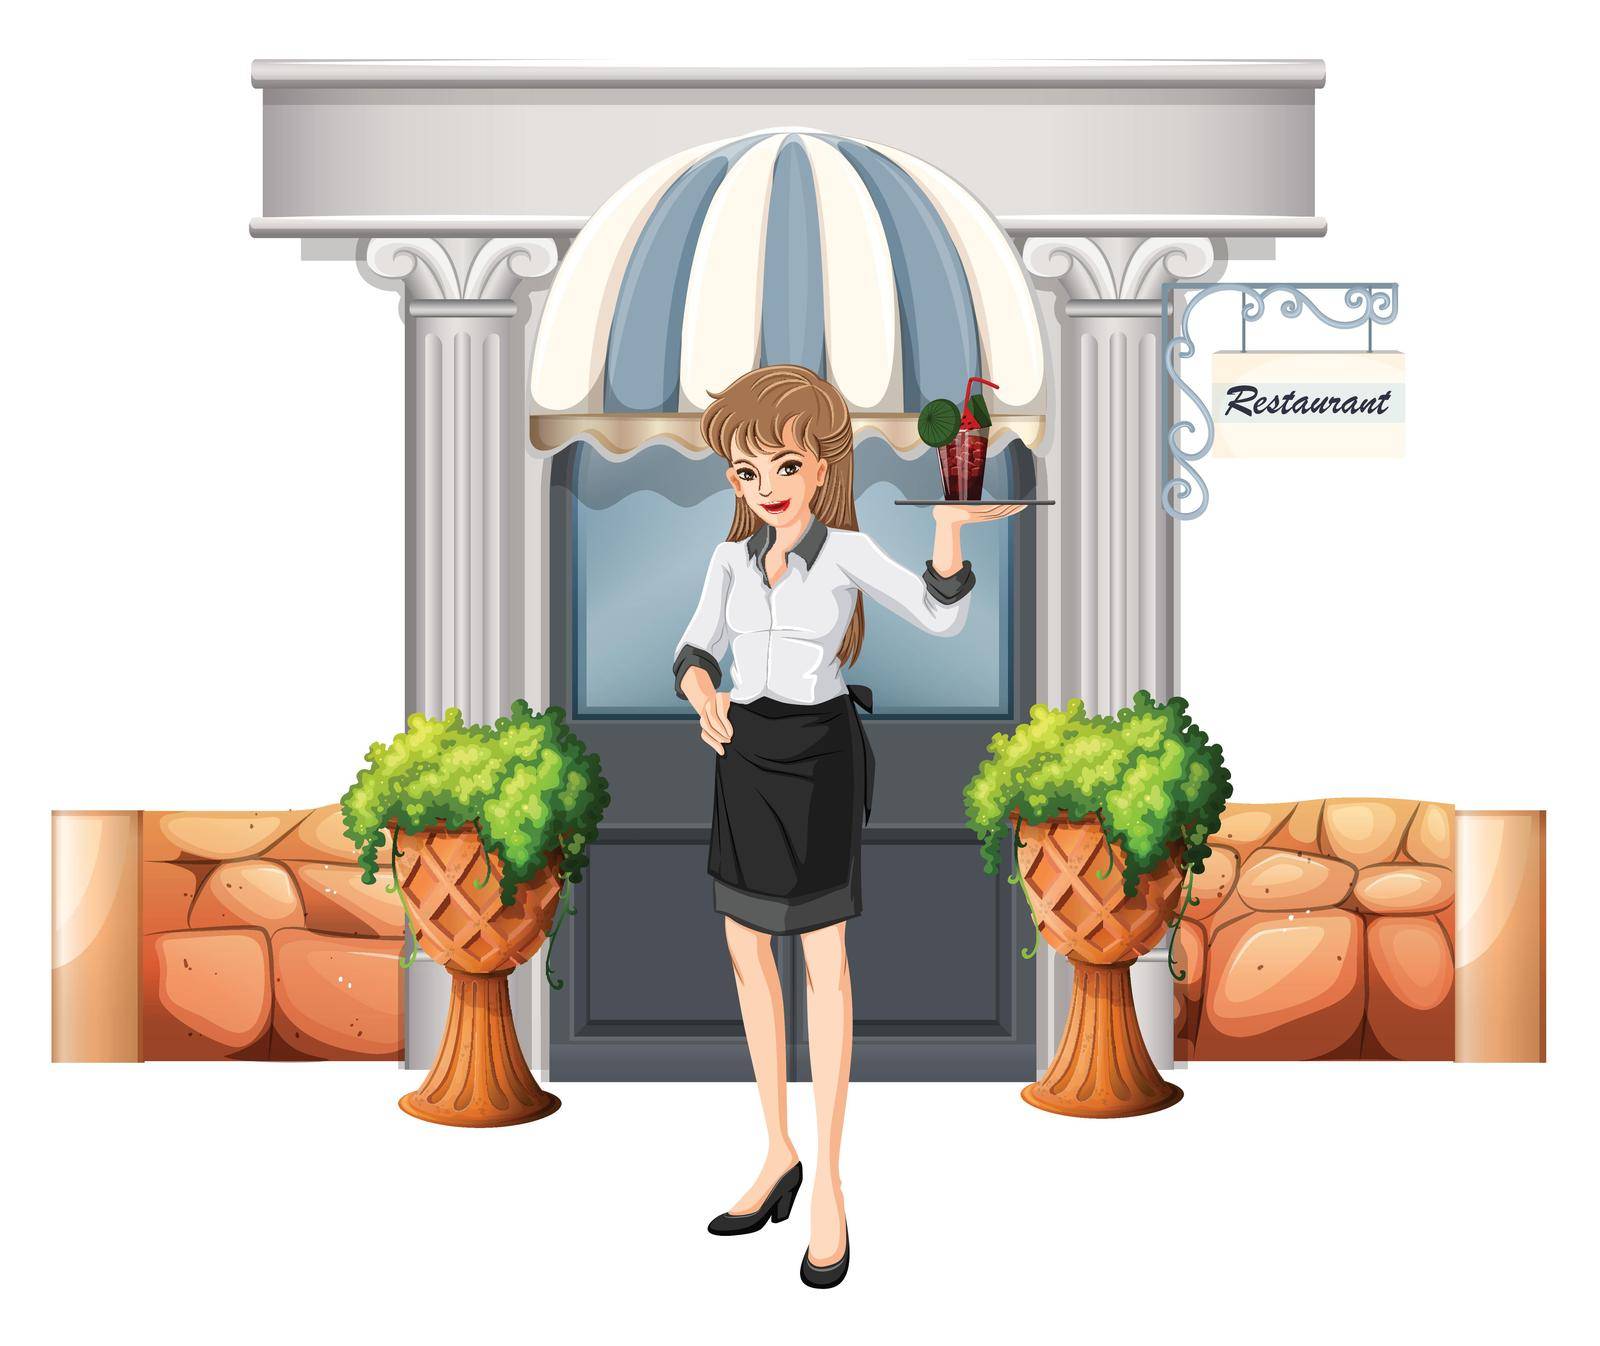 Illustration of a waitress holding a tray in front of the restaurant on a white background